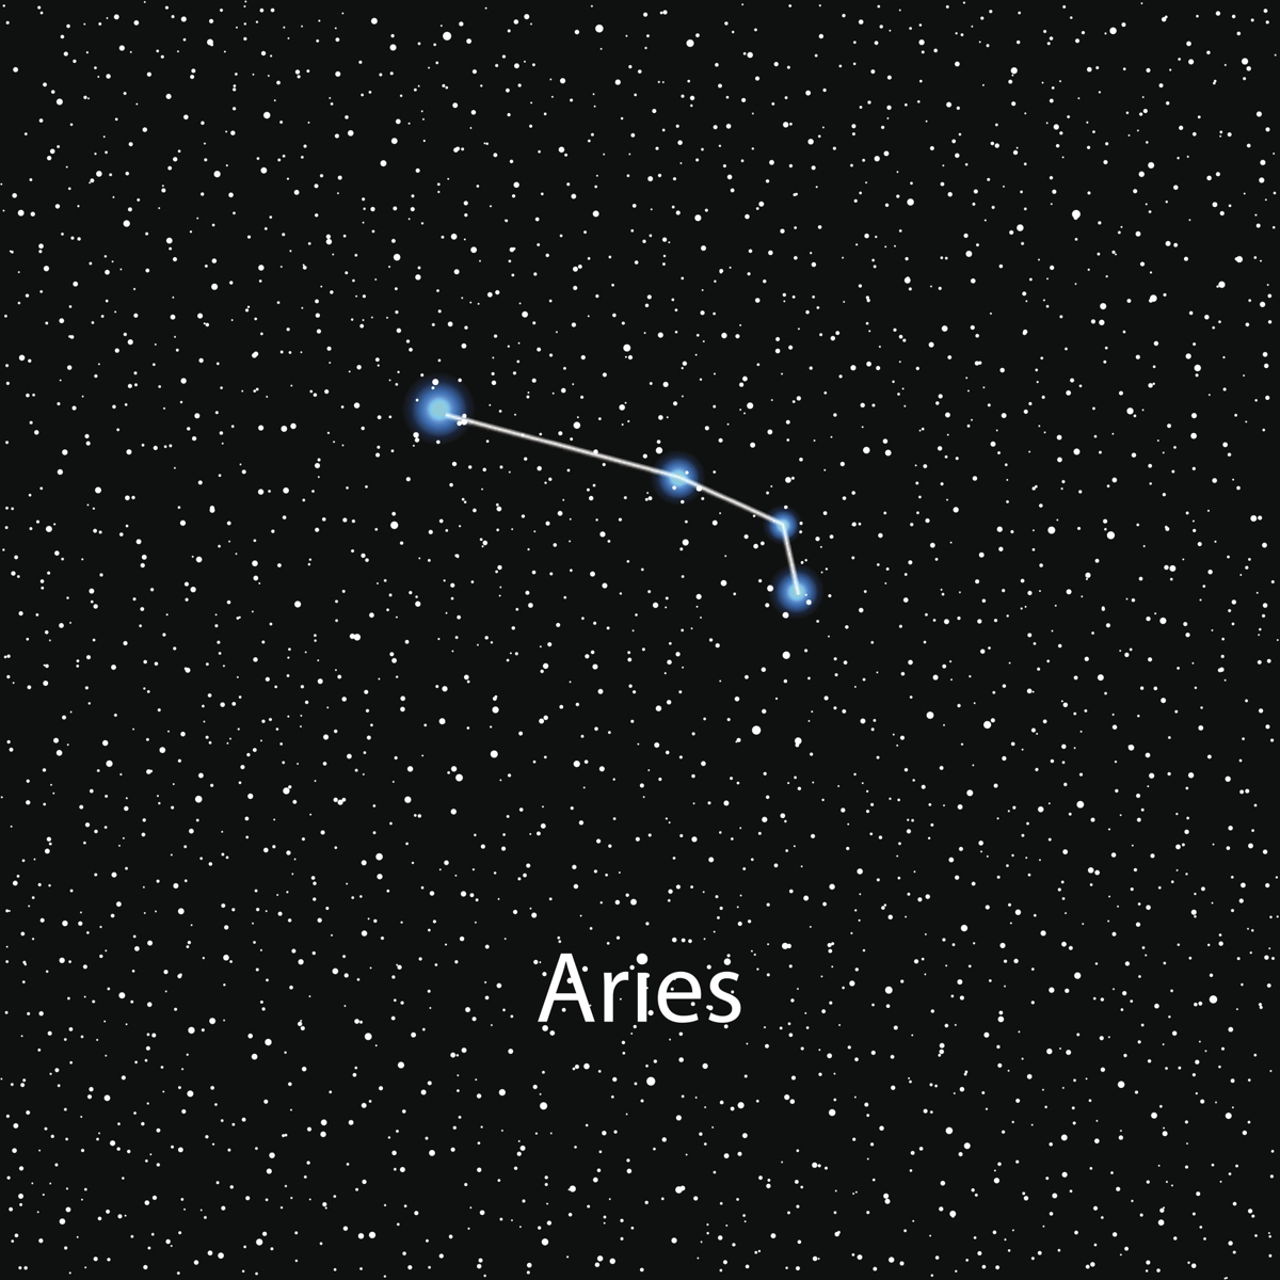 Facts About the Constellation Aries